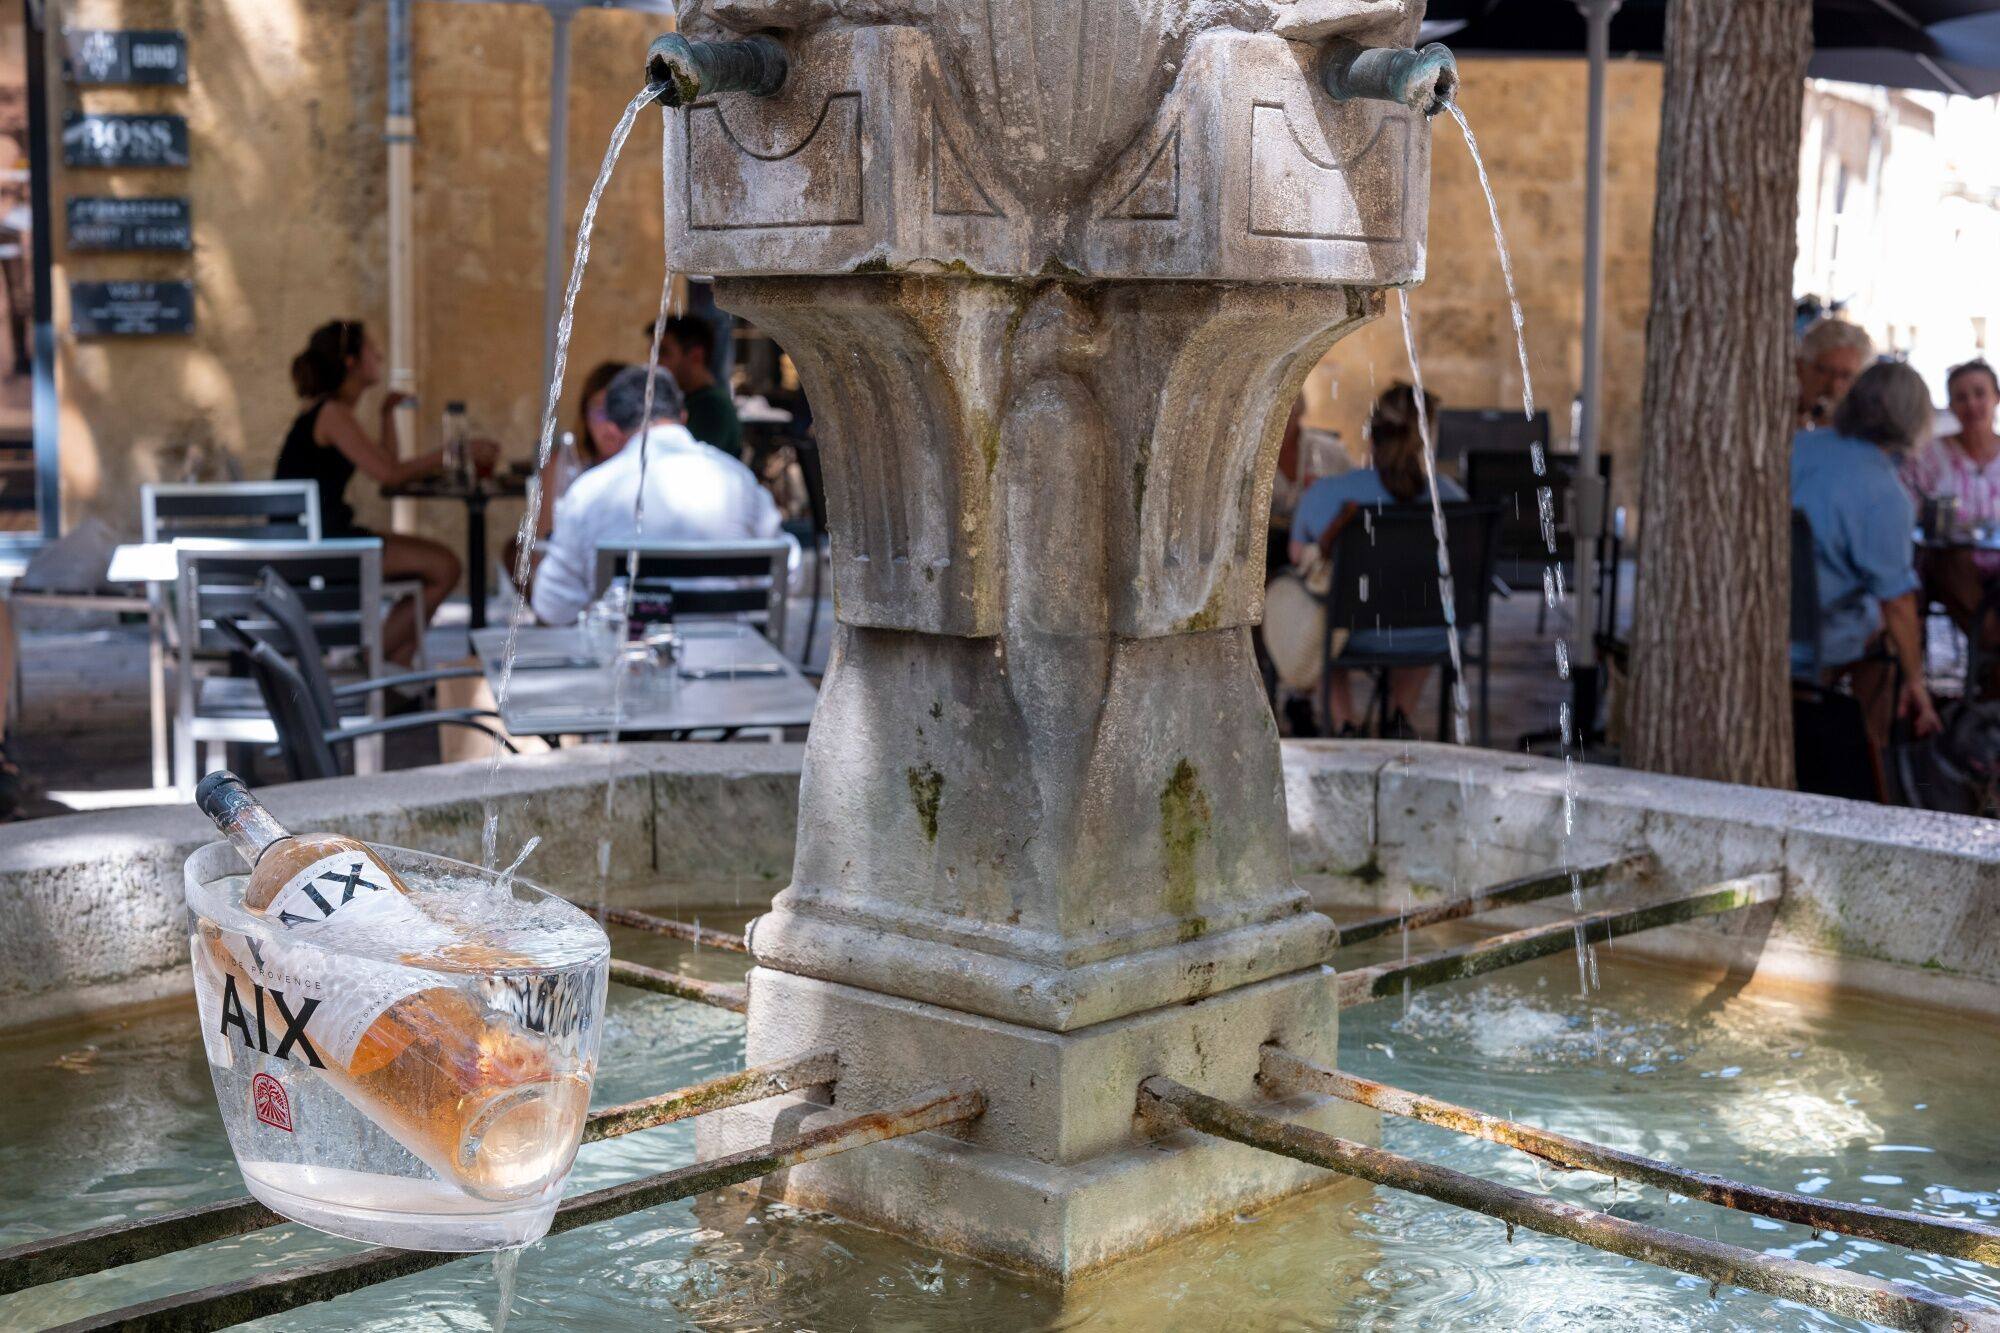 A bottle of Aix Rose wine cools in the waters of a street fountain in Aix-en-provence, France. Photo: Bloomberg